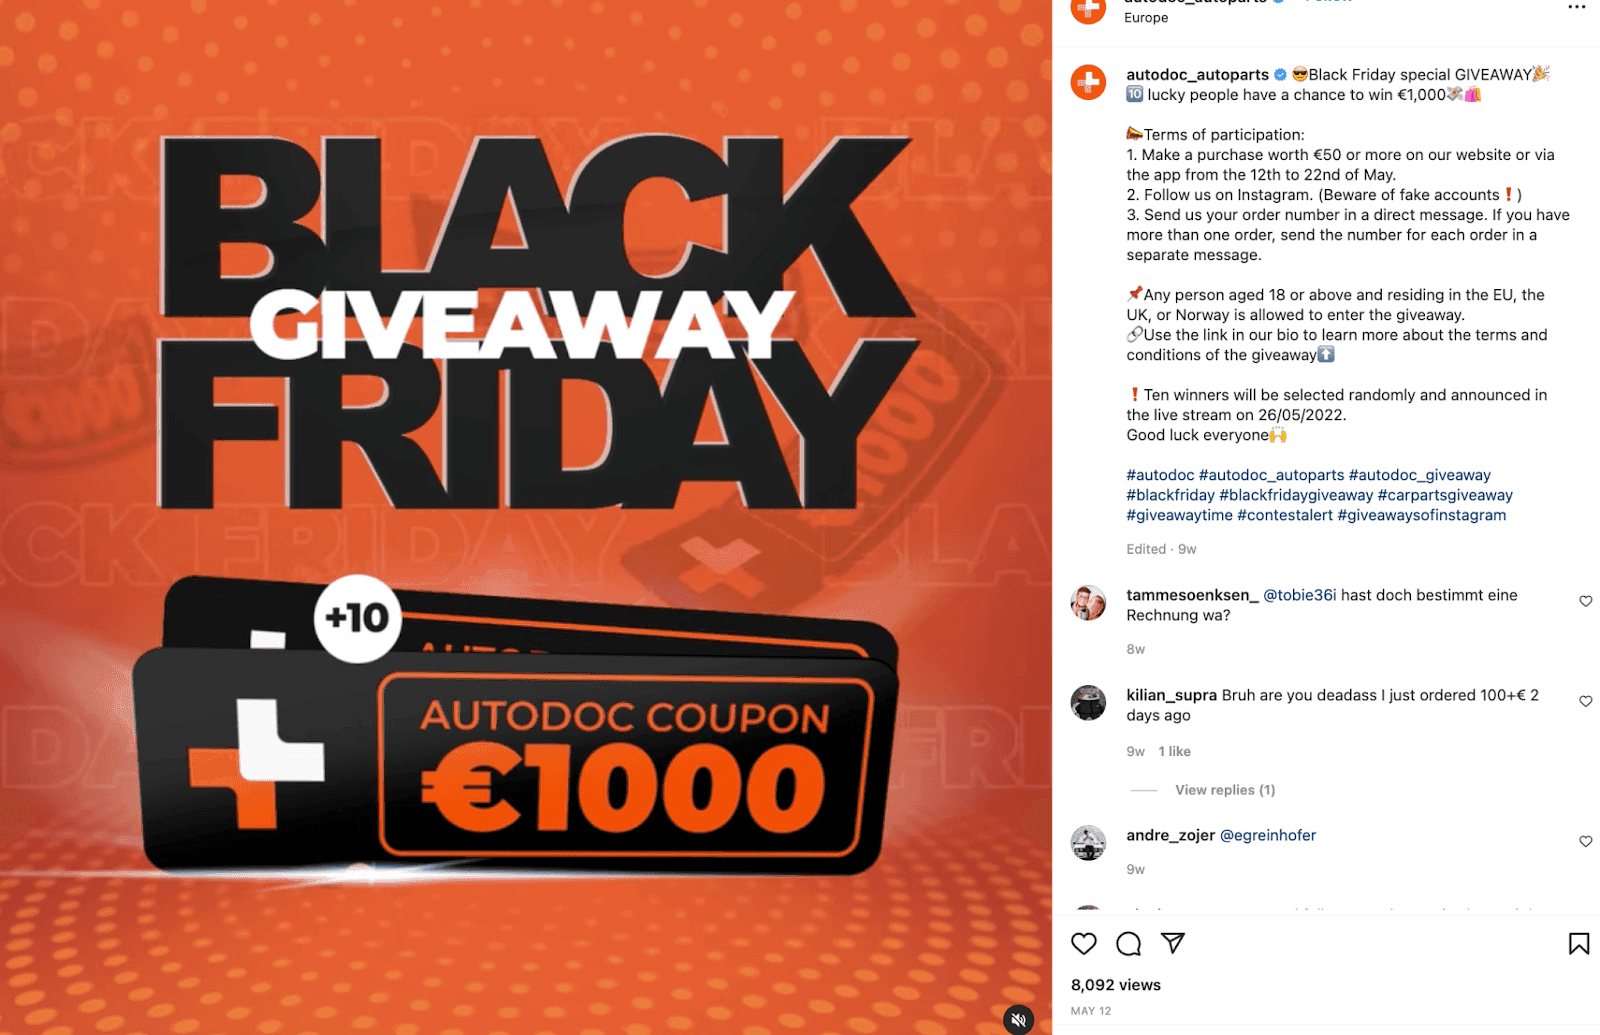 Red and black Instagram post by Autodoc for Black Friday giveaway